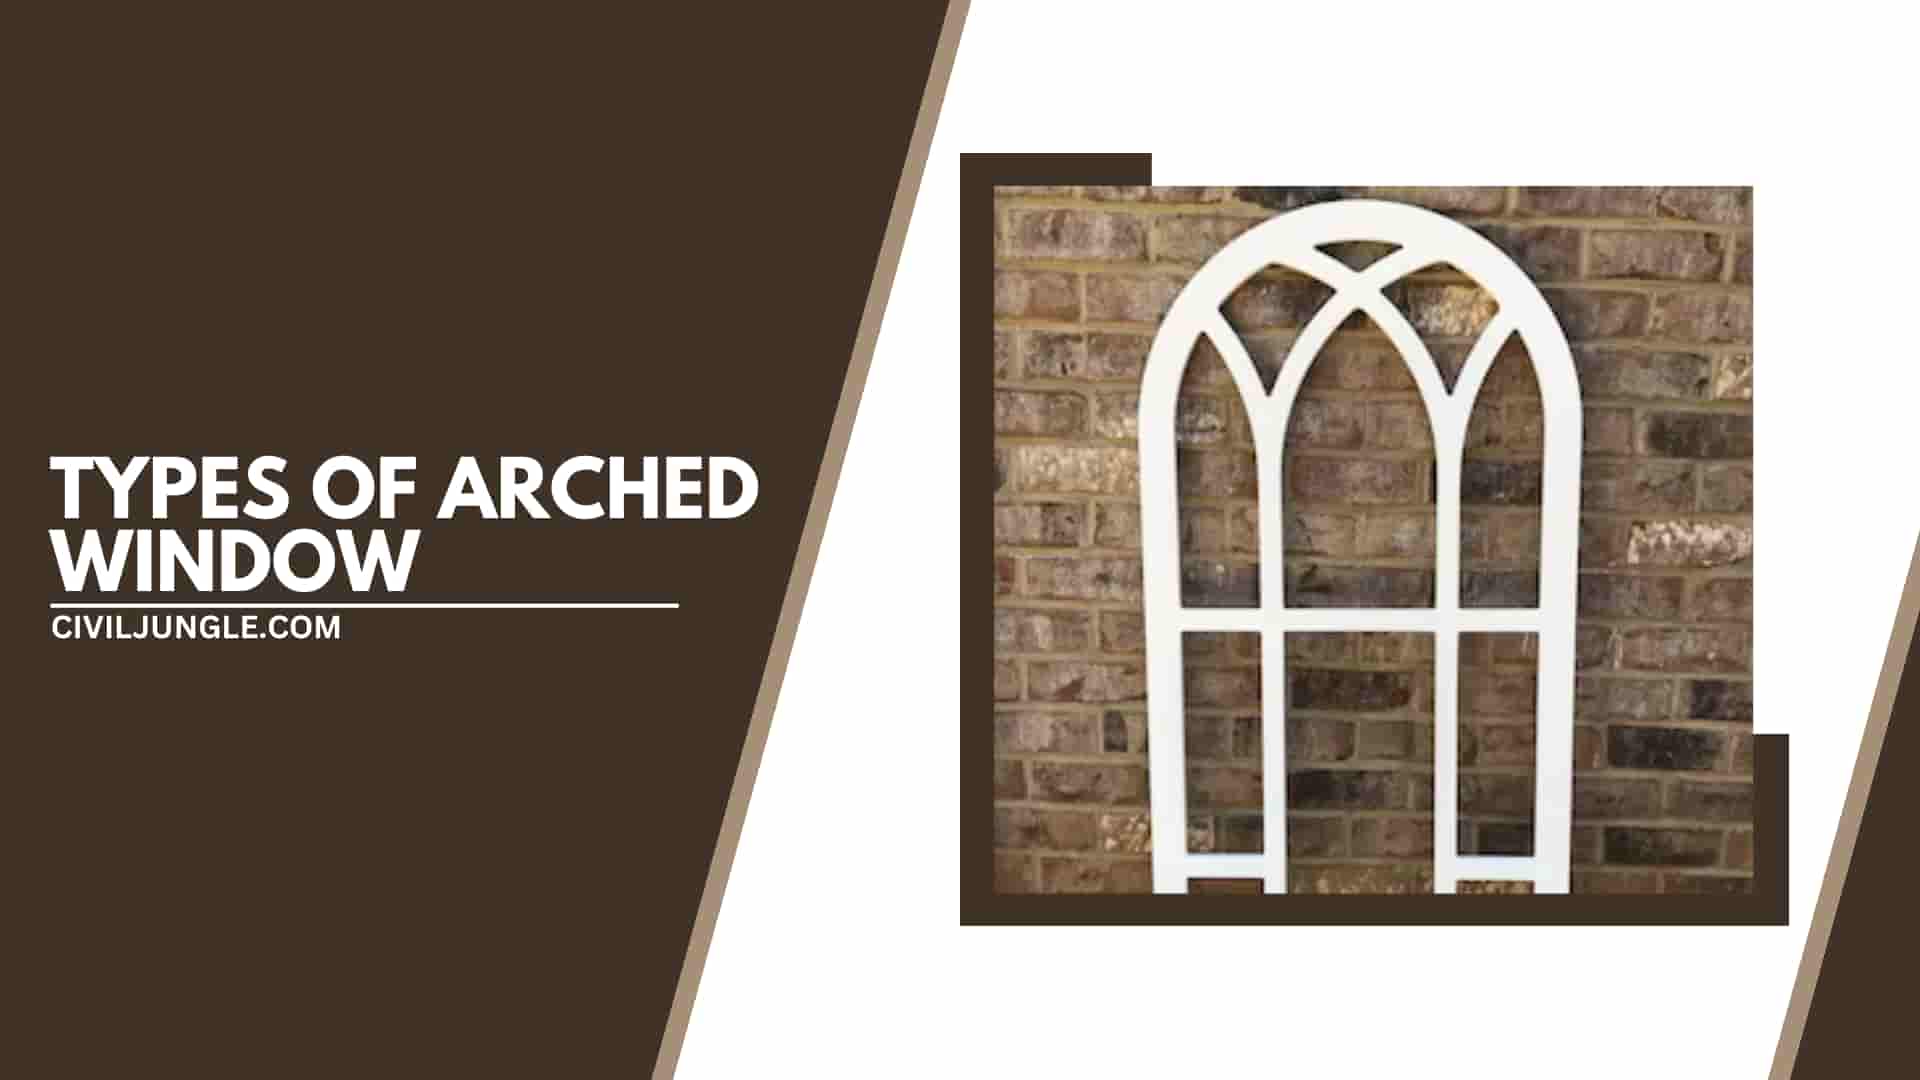 Types of Arched Window